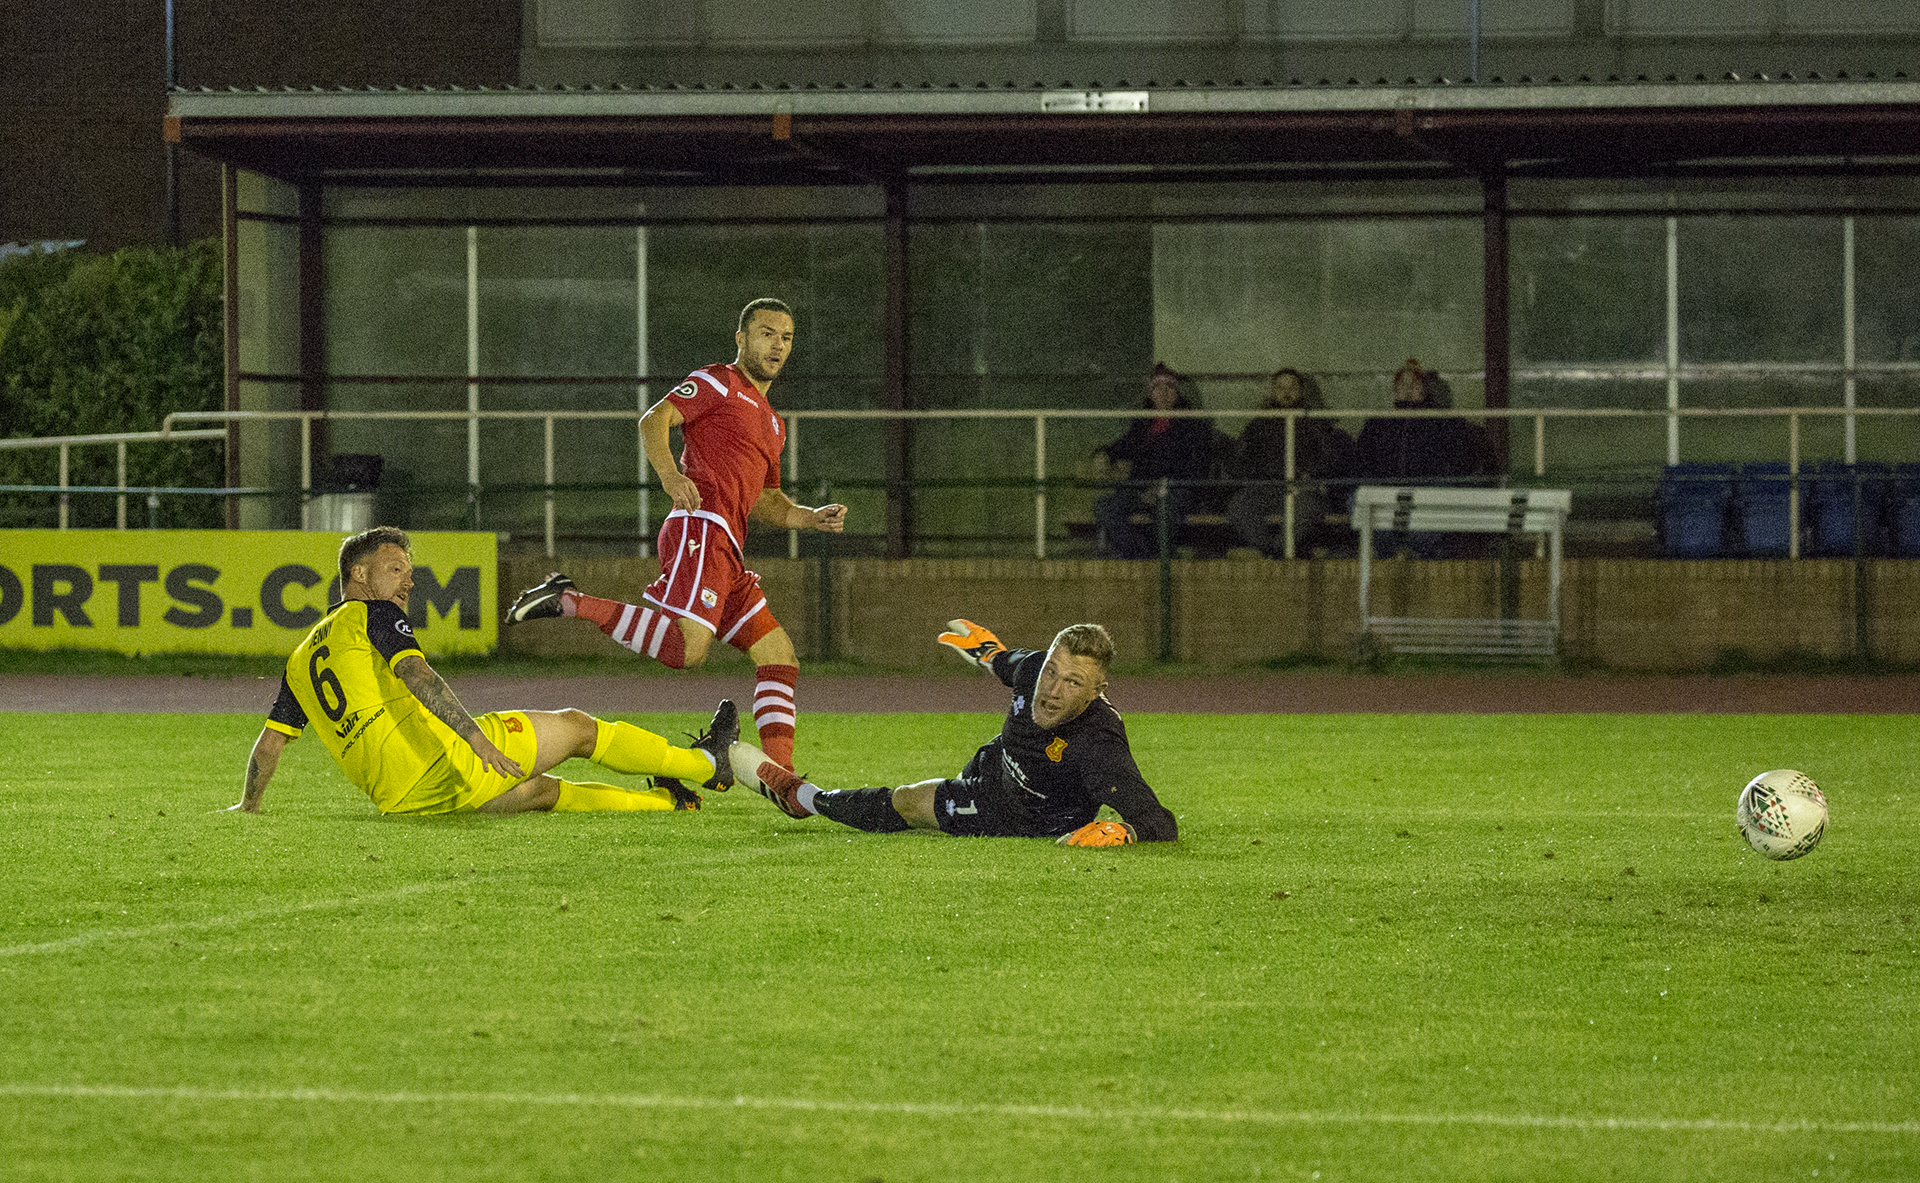 Ryan Wignall slots beyond Dave Jones to double The Nomads' lead © NCM Media